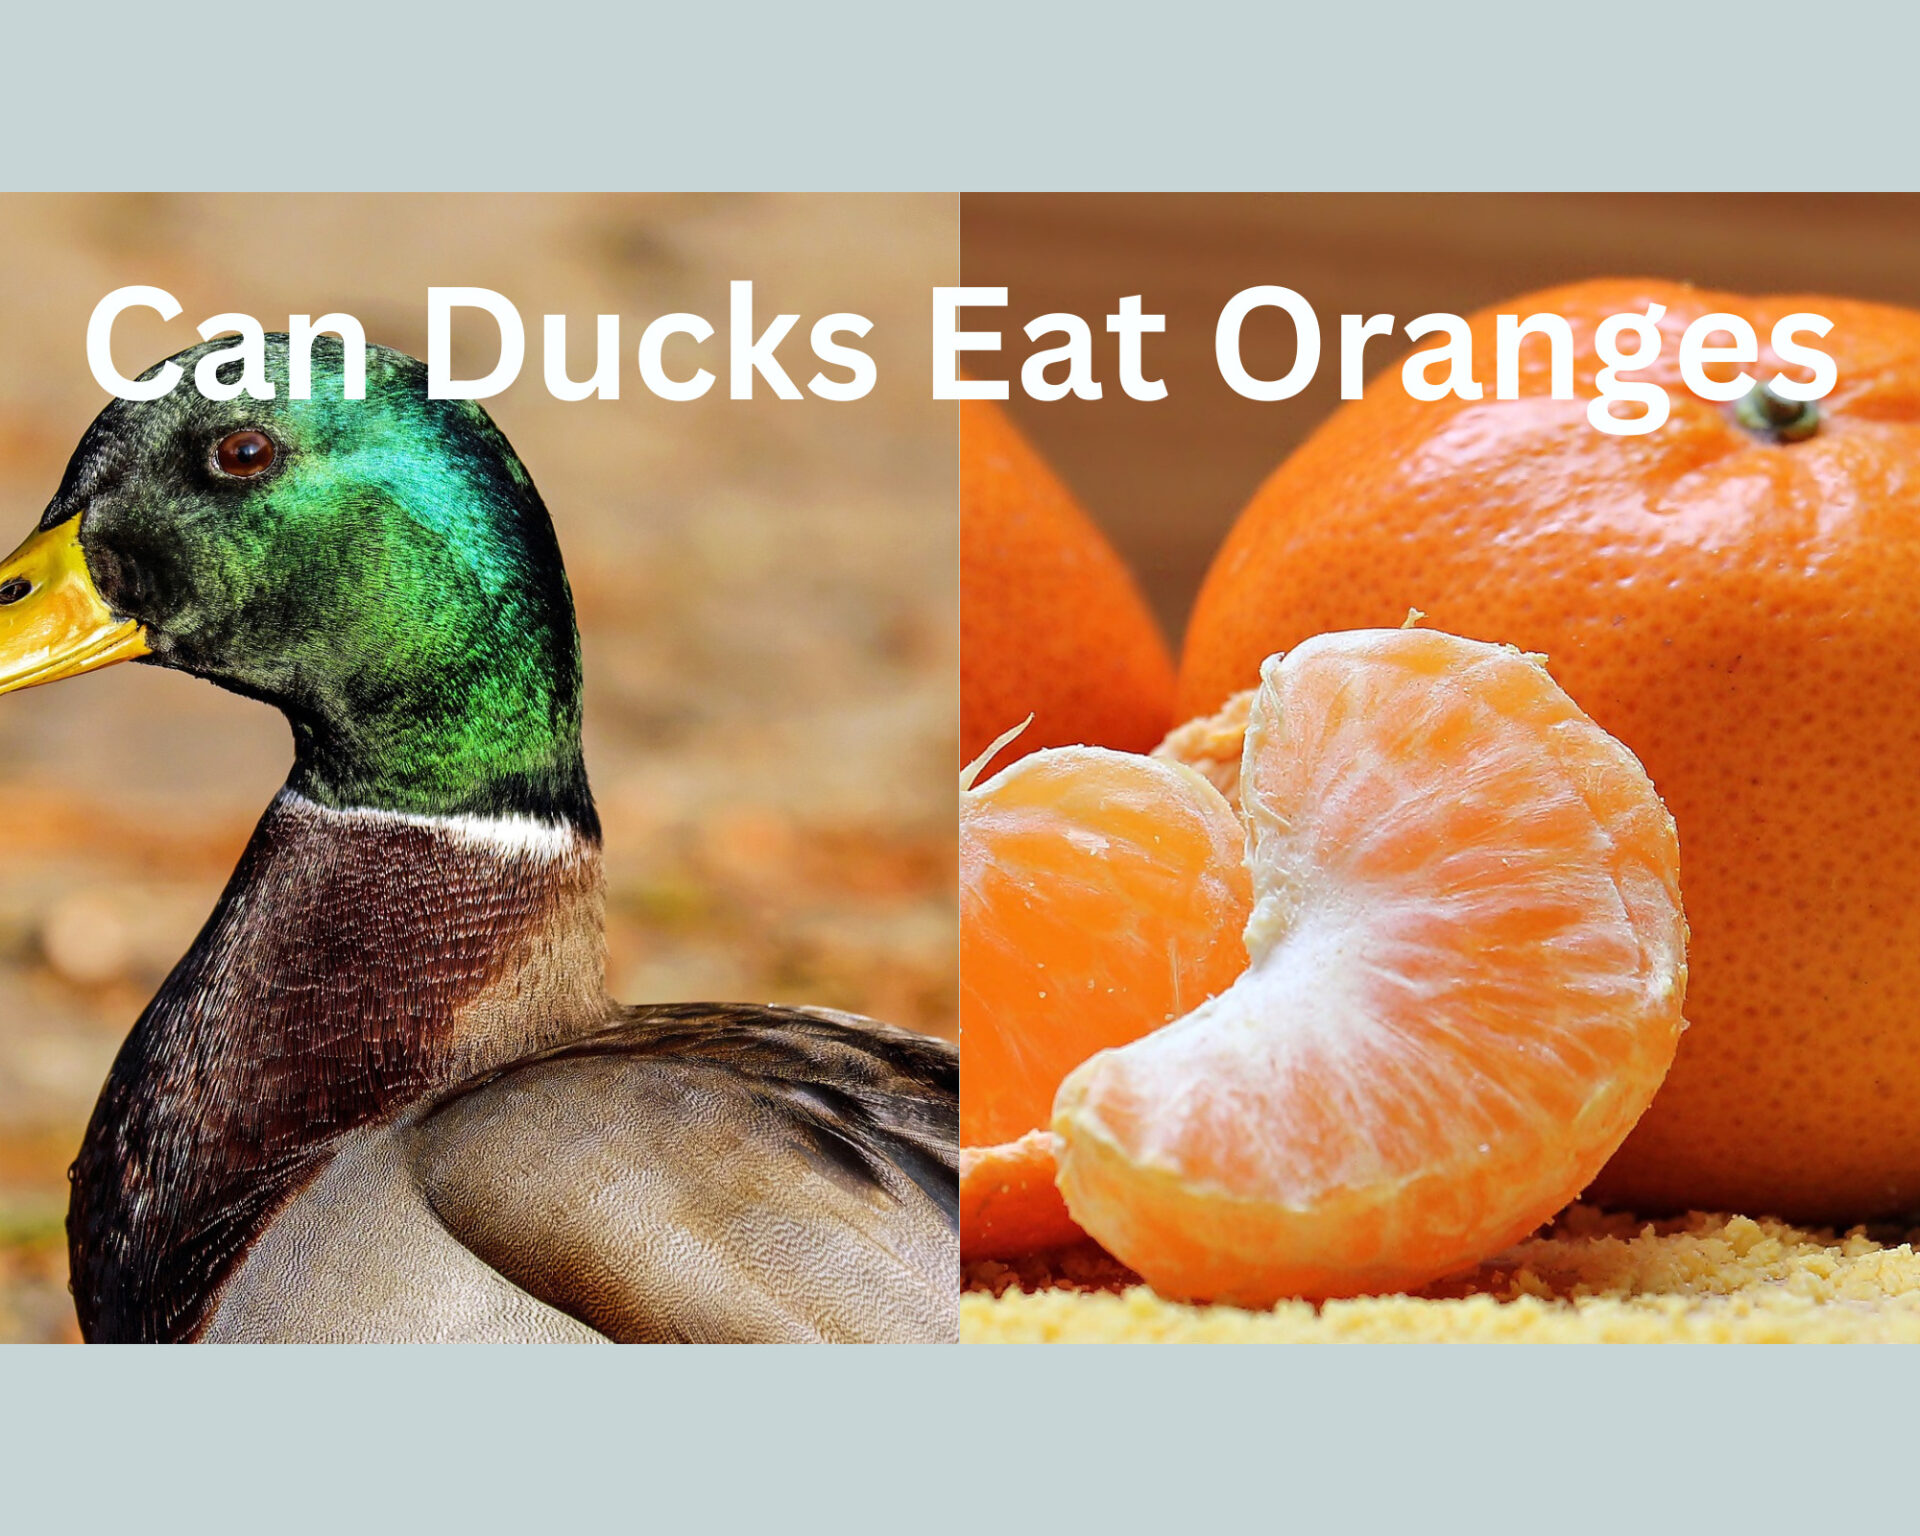 Can Ducks Eat Oranges? (Pros and Cons)